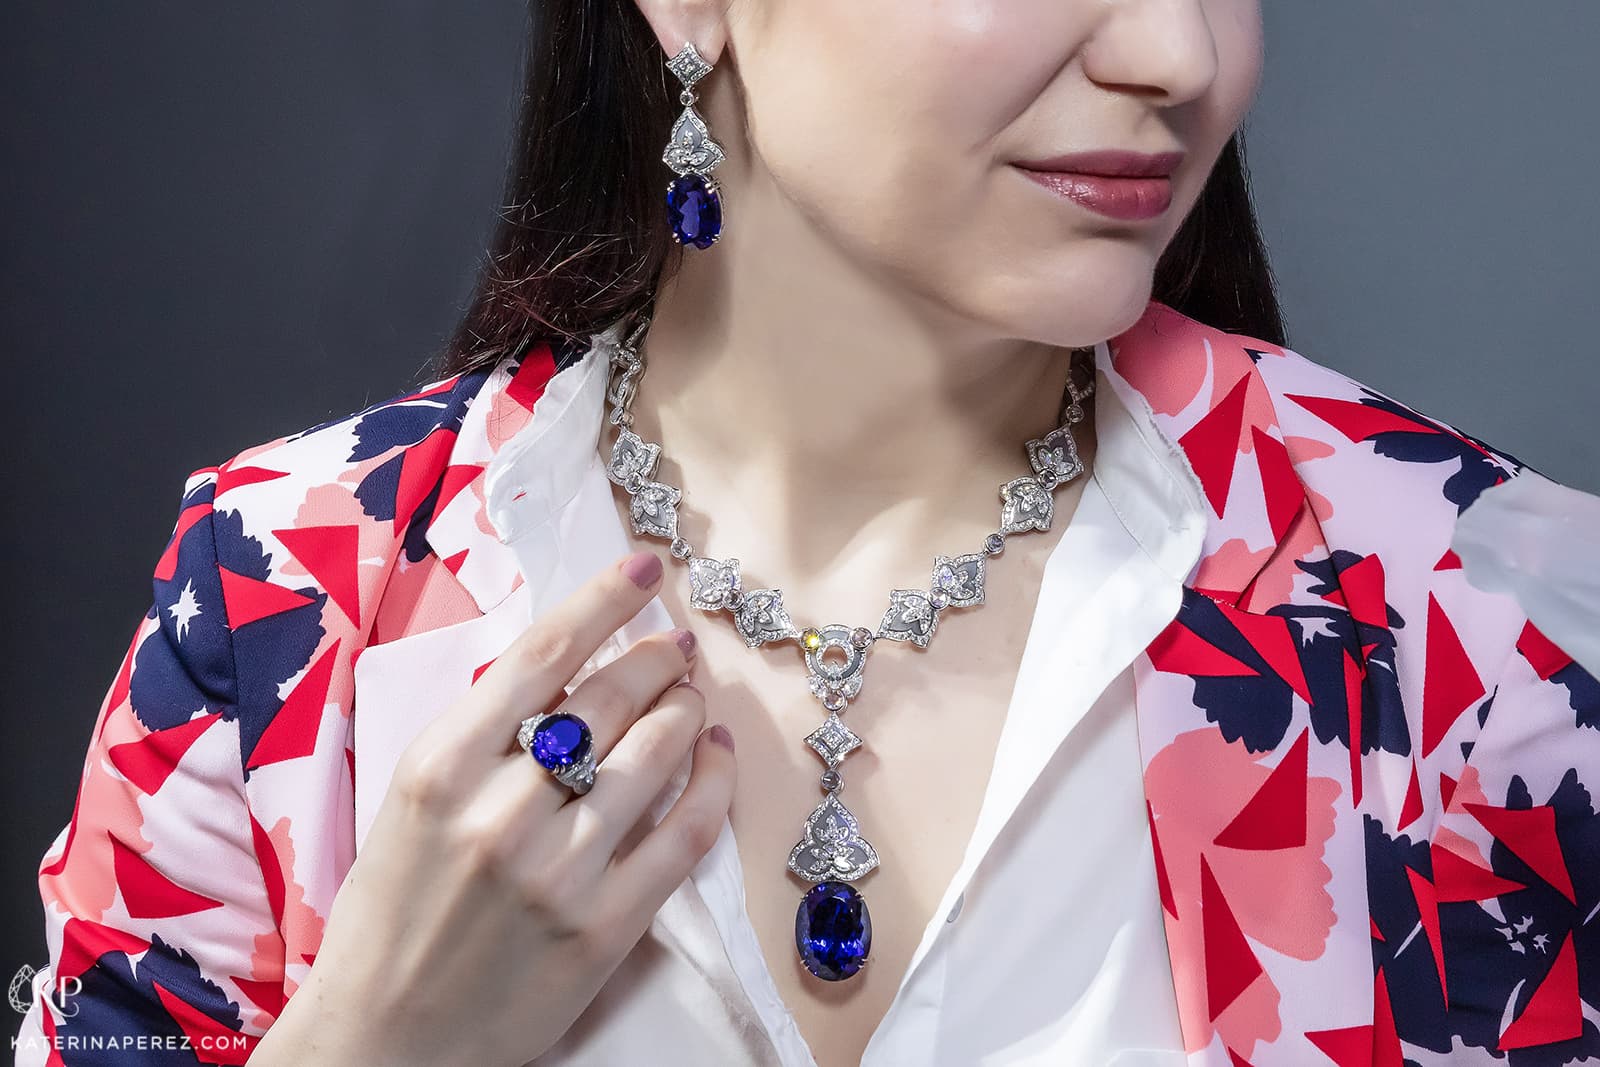 Henn of London necklace with 61.11ct tanzanite, earrings with 48.83ct tanzanite, ring with 18.27ct tanzanite, all with diamonds and enamel in white gold